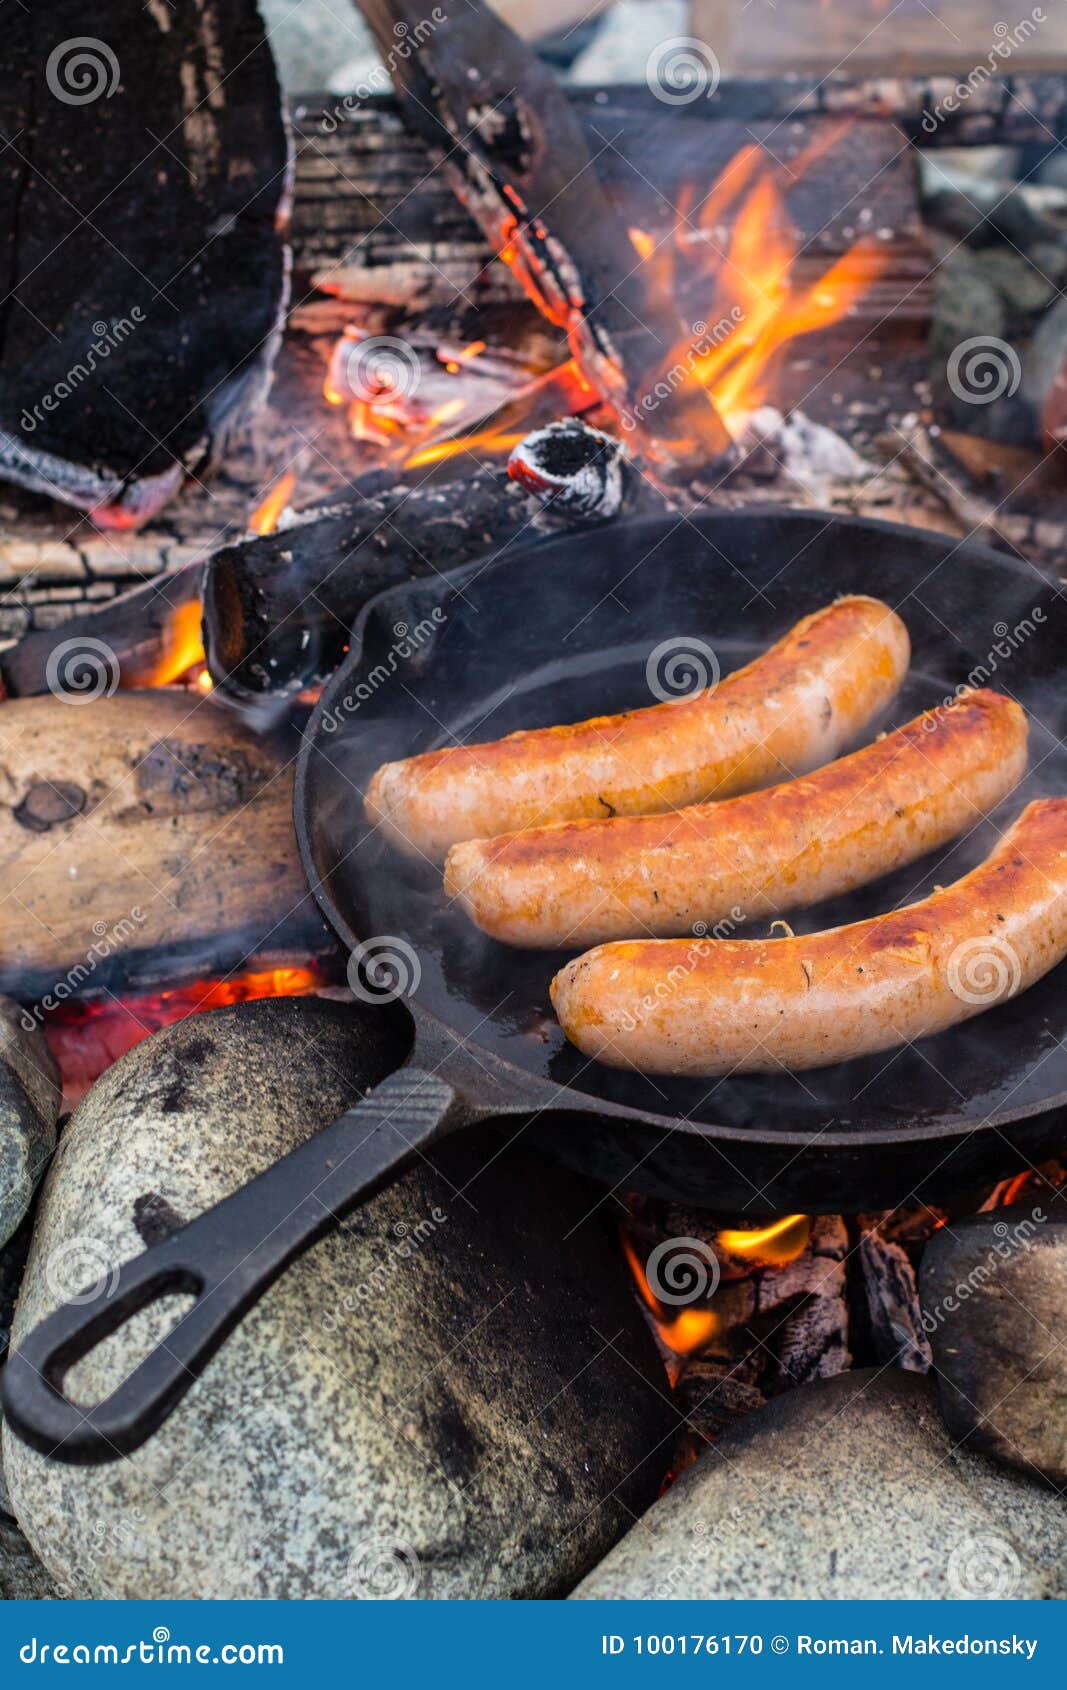 https://thumbs.dreamstime.com/z/live-fire-cooking-juicy-sausages-over-campfire-cooking-sausages-cast-iron-skillet-campfire-camping-good-positive-100176170.jpg